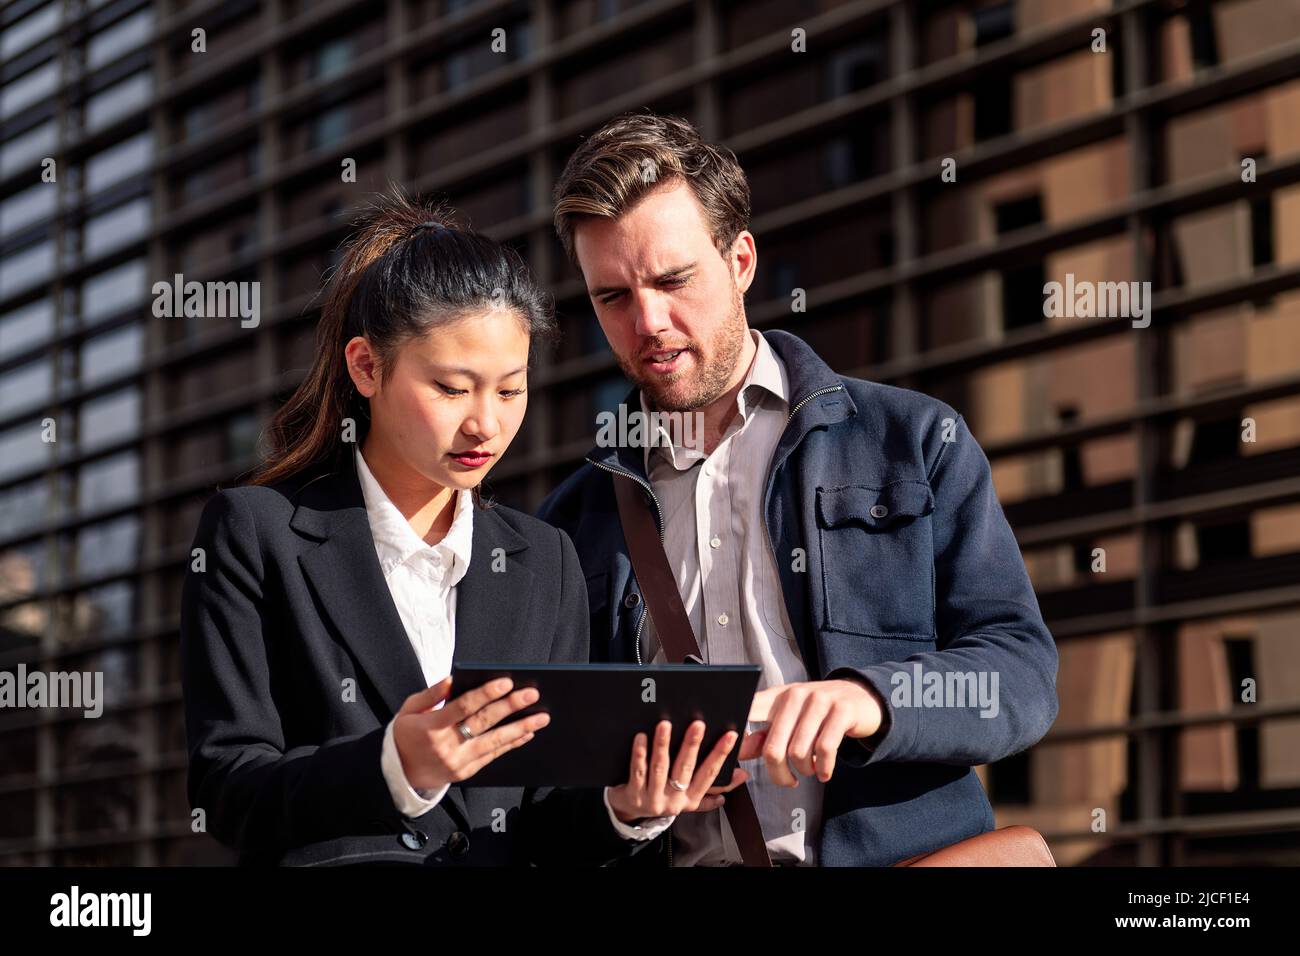 business woman showing tablet to entrepreneur man Stock Photo